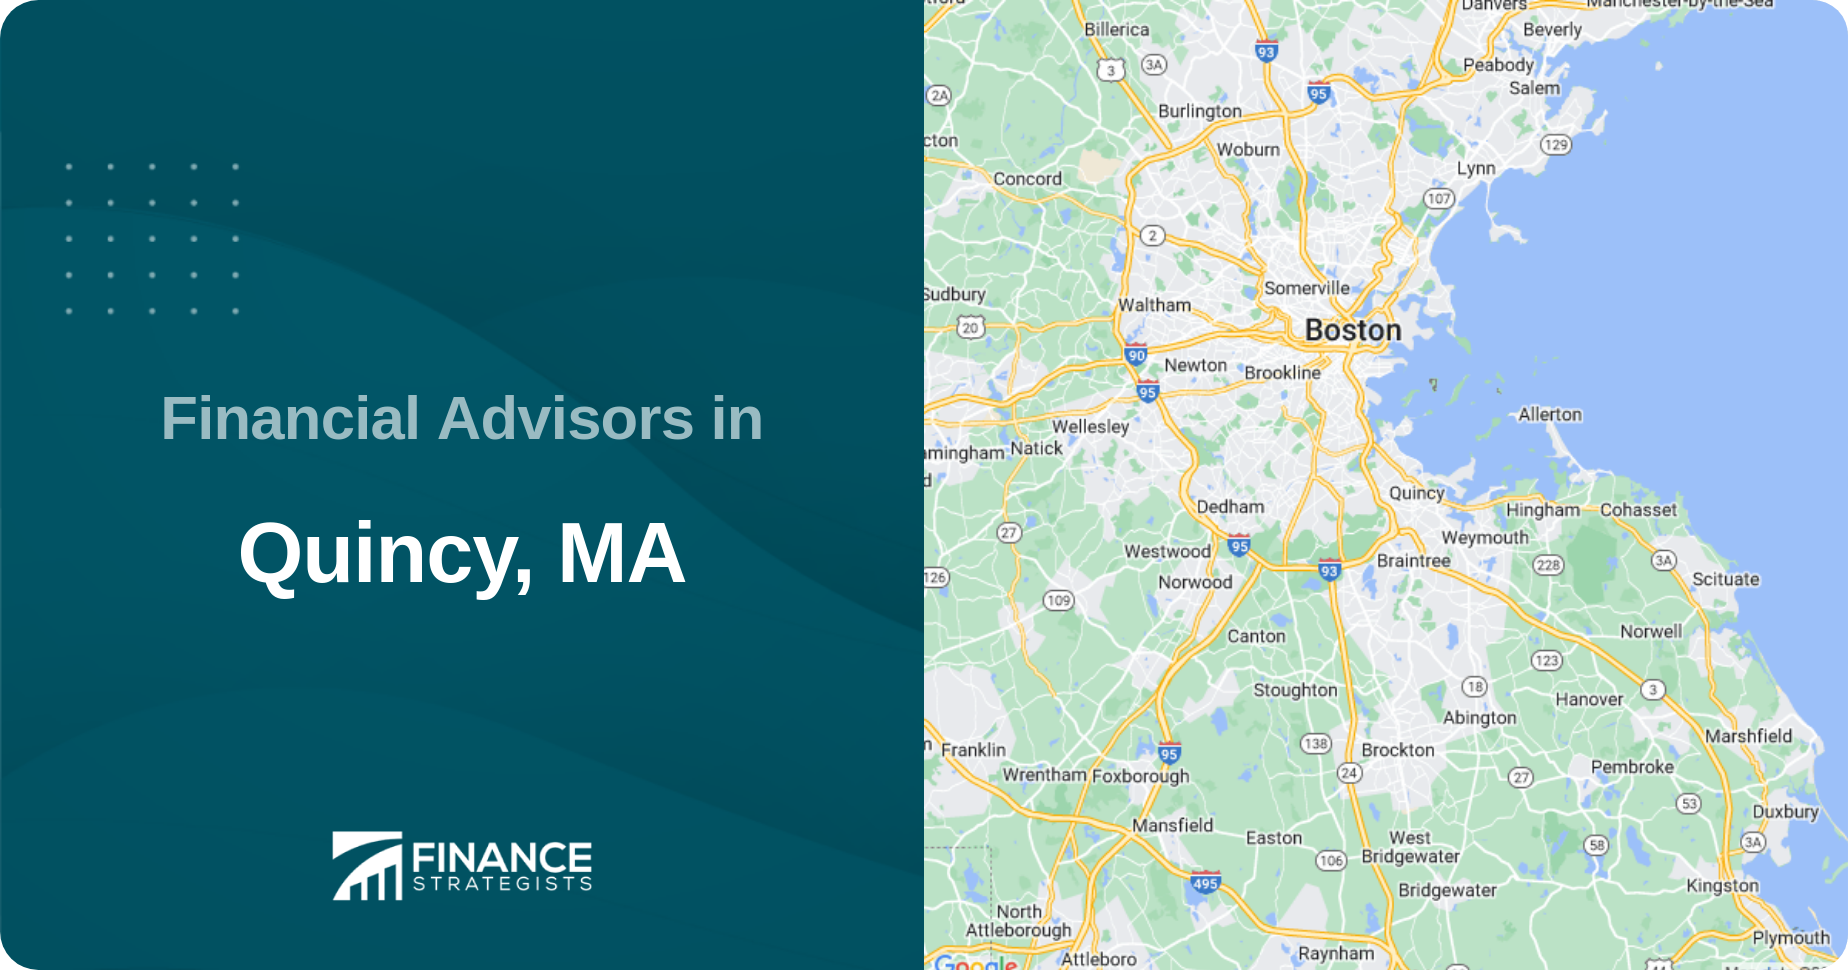 Financial Advisors in Quincy, MA